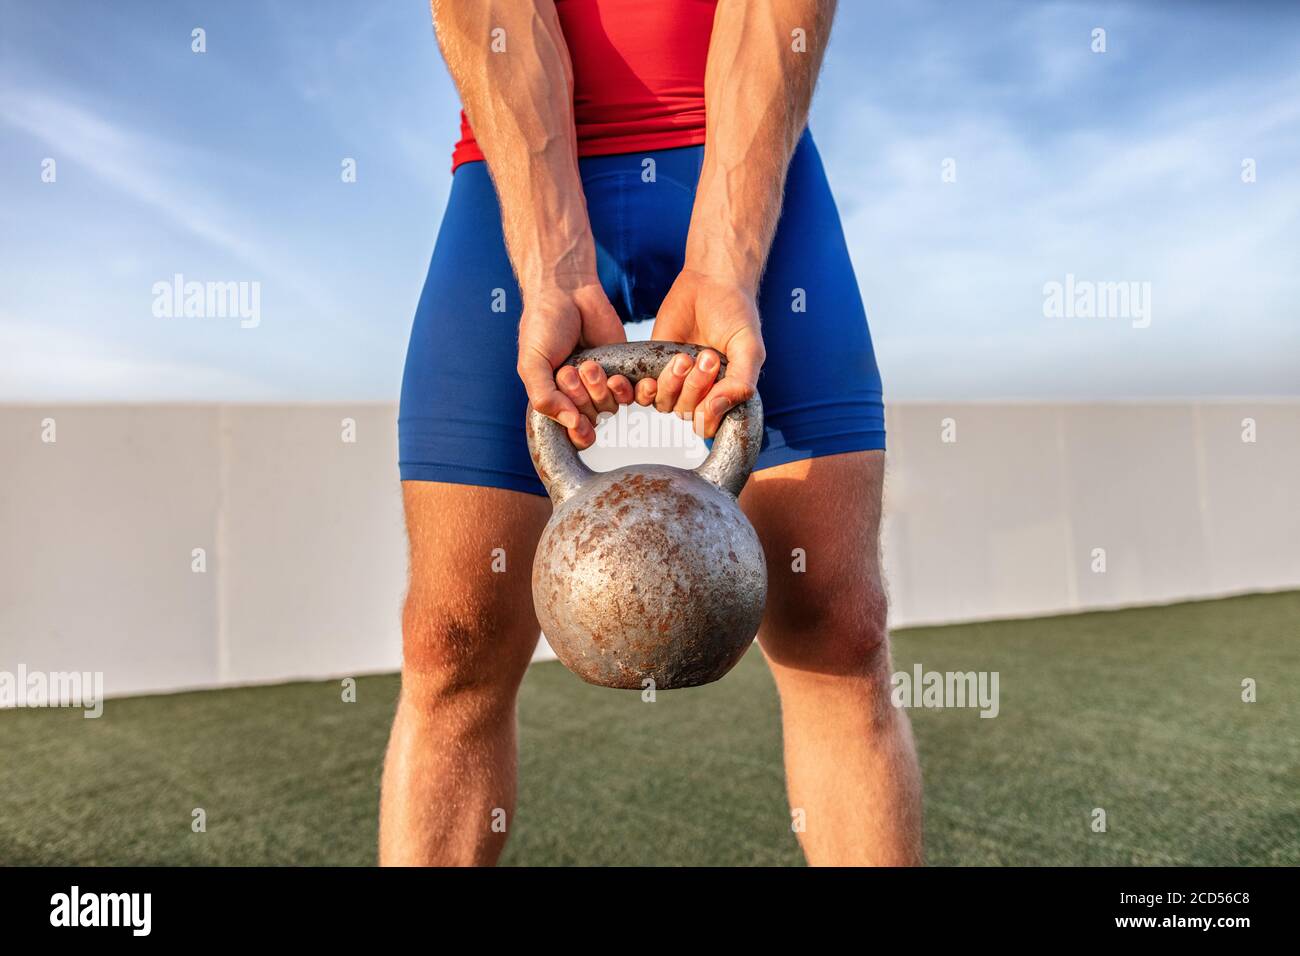 Kettlebell weightlifting fit man lifting crossfit weight at outdoor gym for squat leg workout Stock Photo